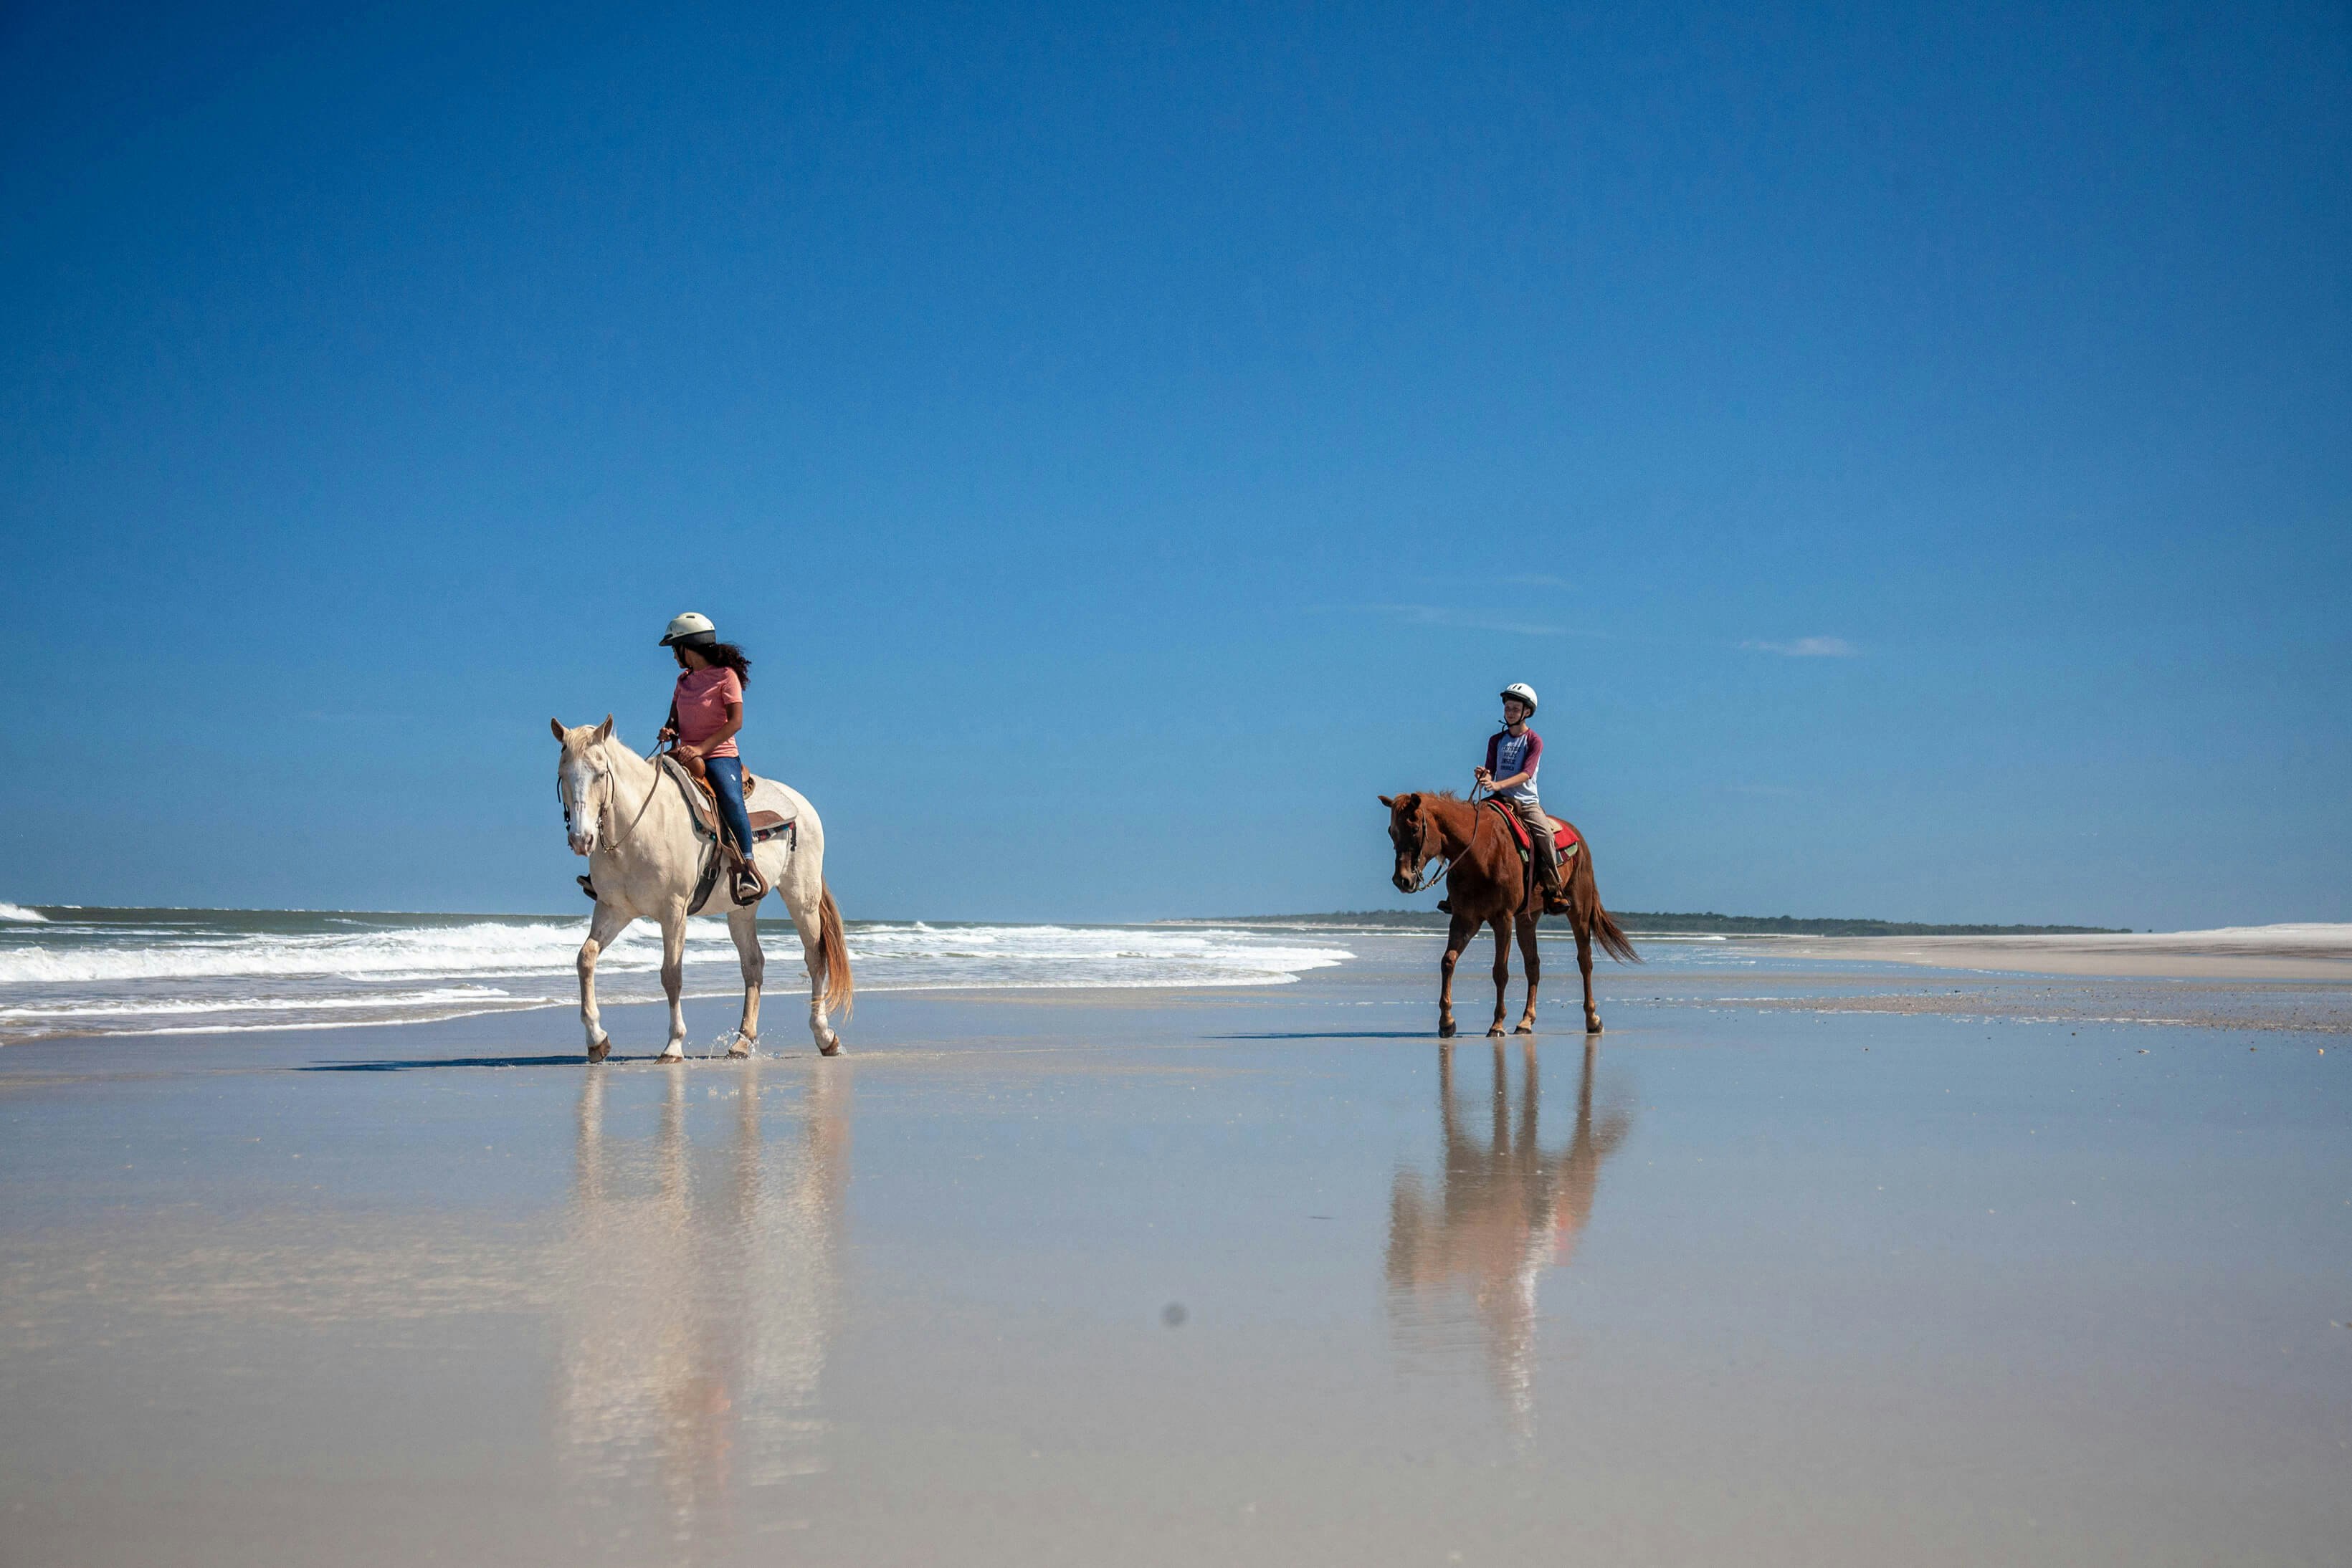 Two people horseback riding on an empty beach on Amelia Island, Florida, on a clear sunny day